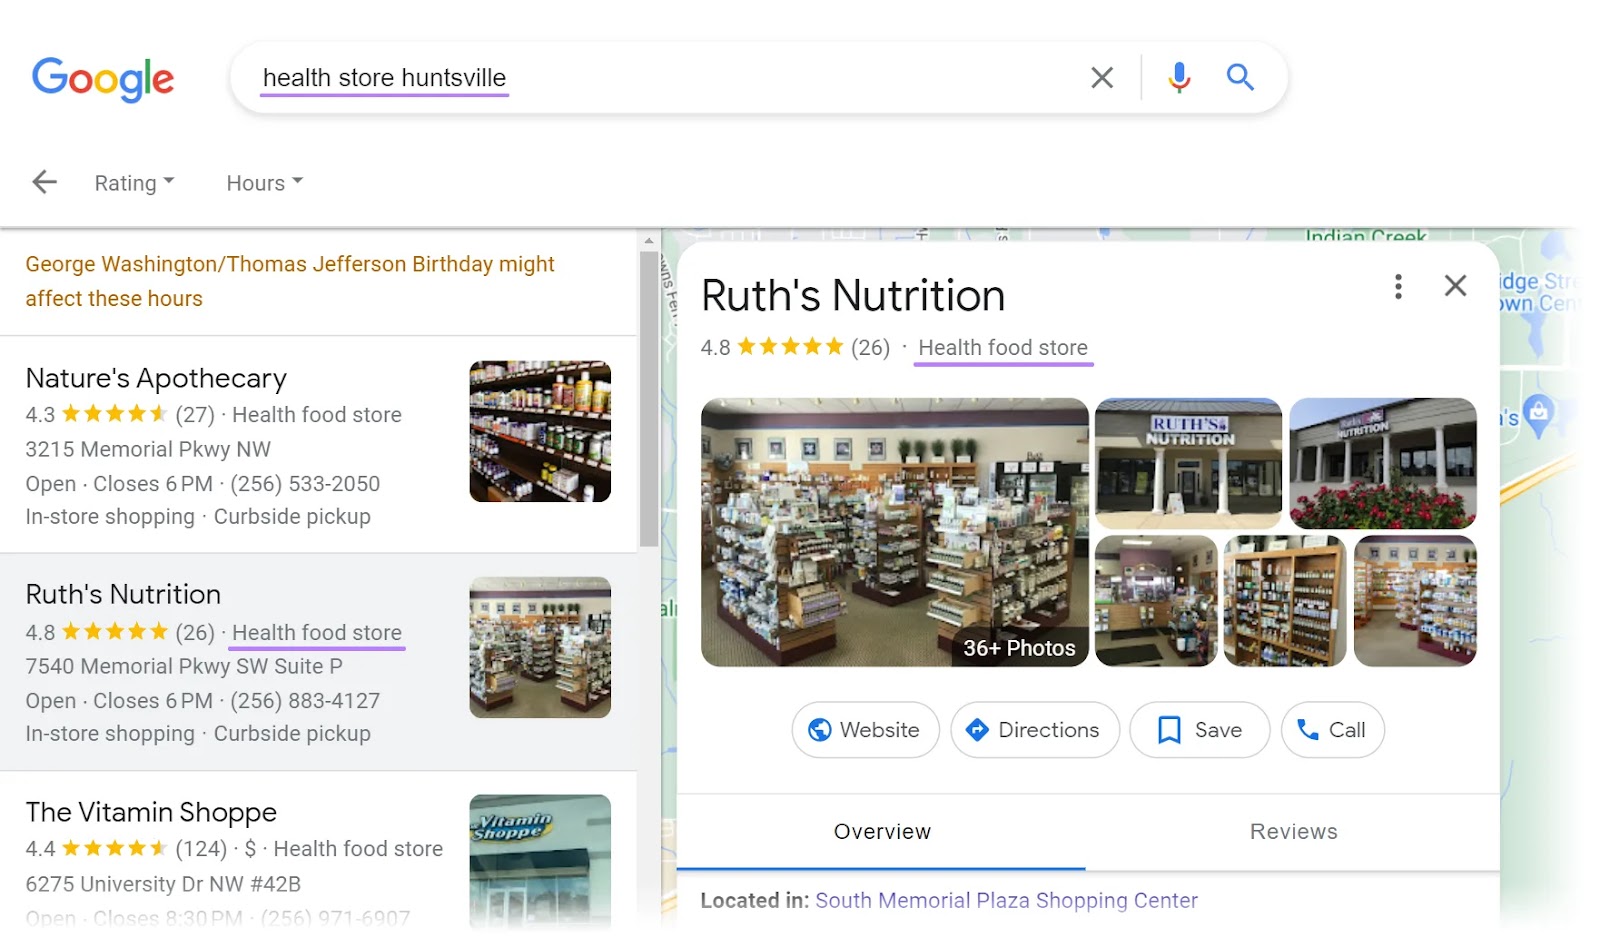 Ruth’s Nutrition’s Google Business Profile with "health food store" category highlighted